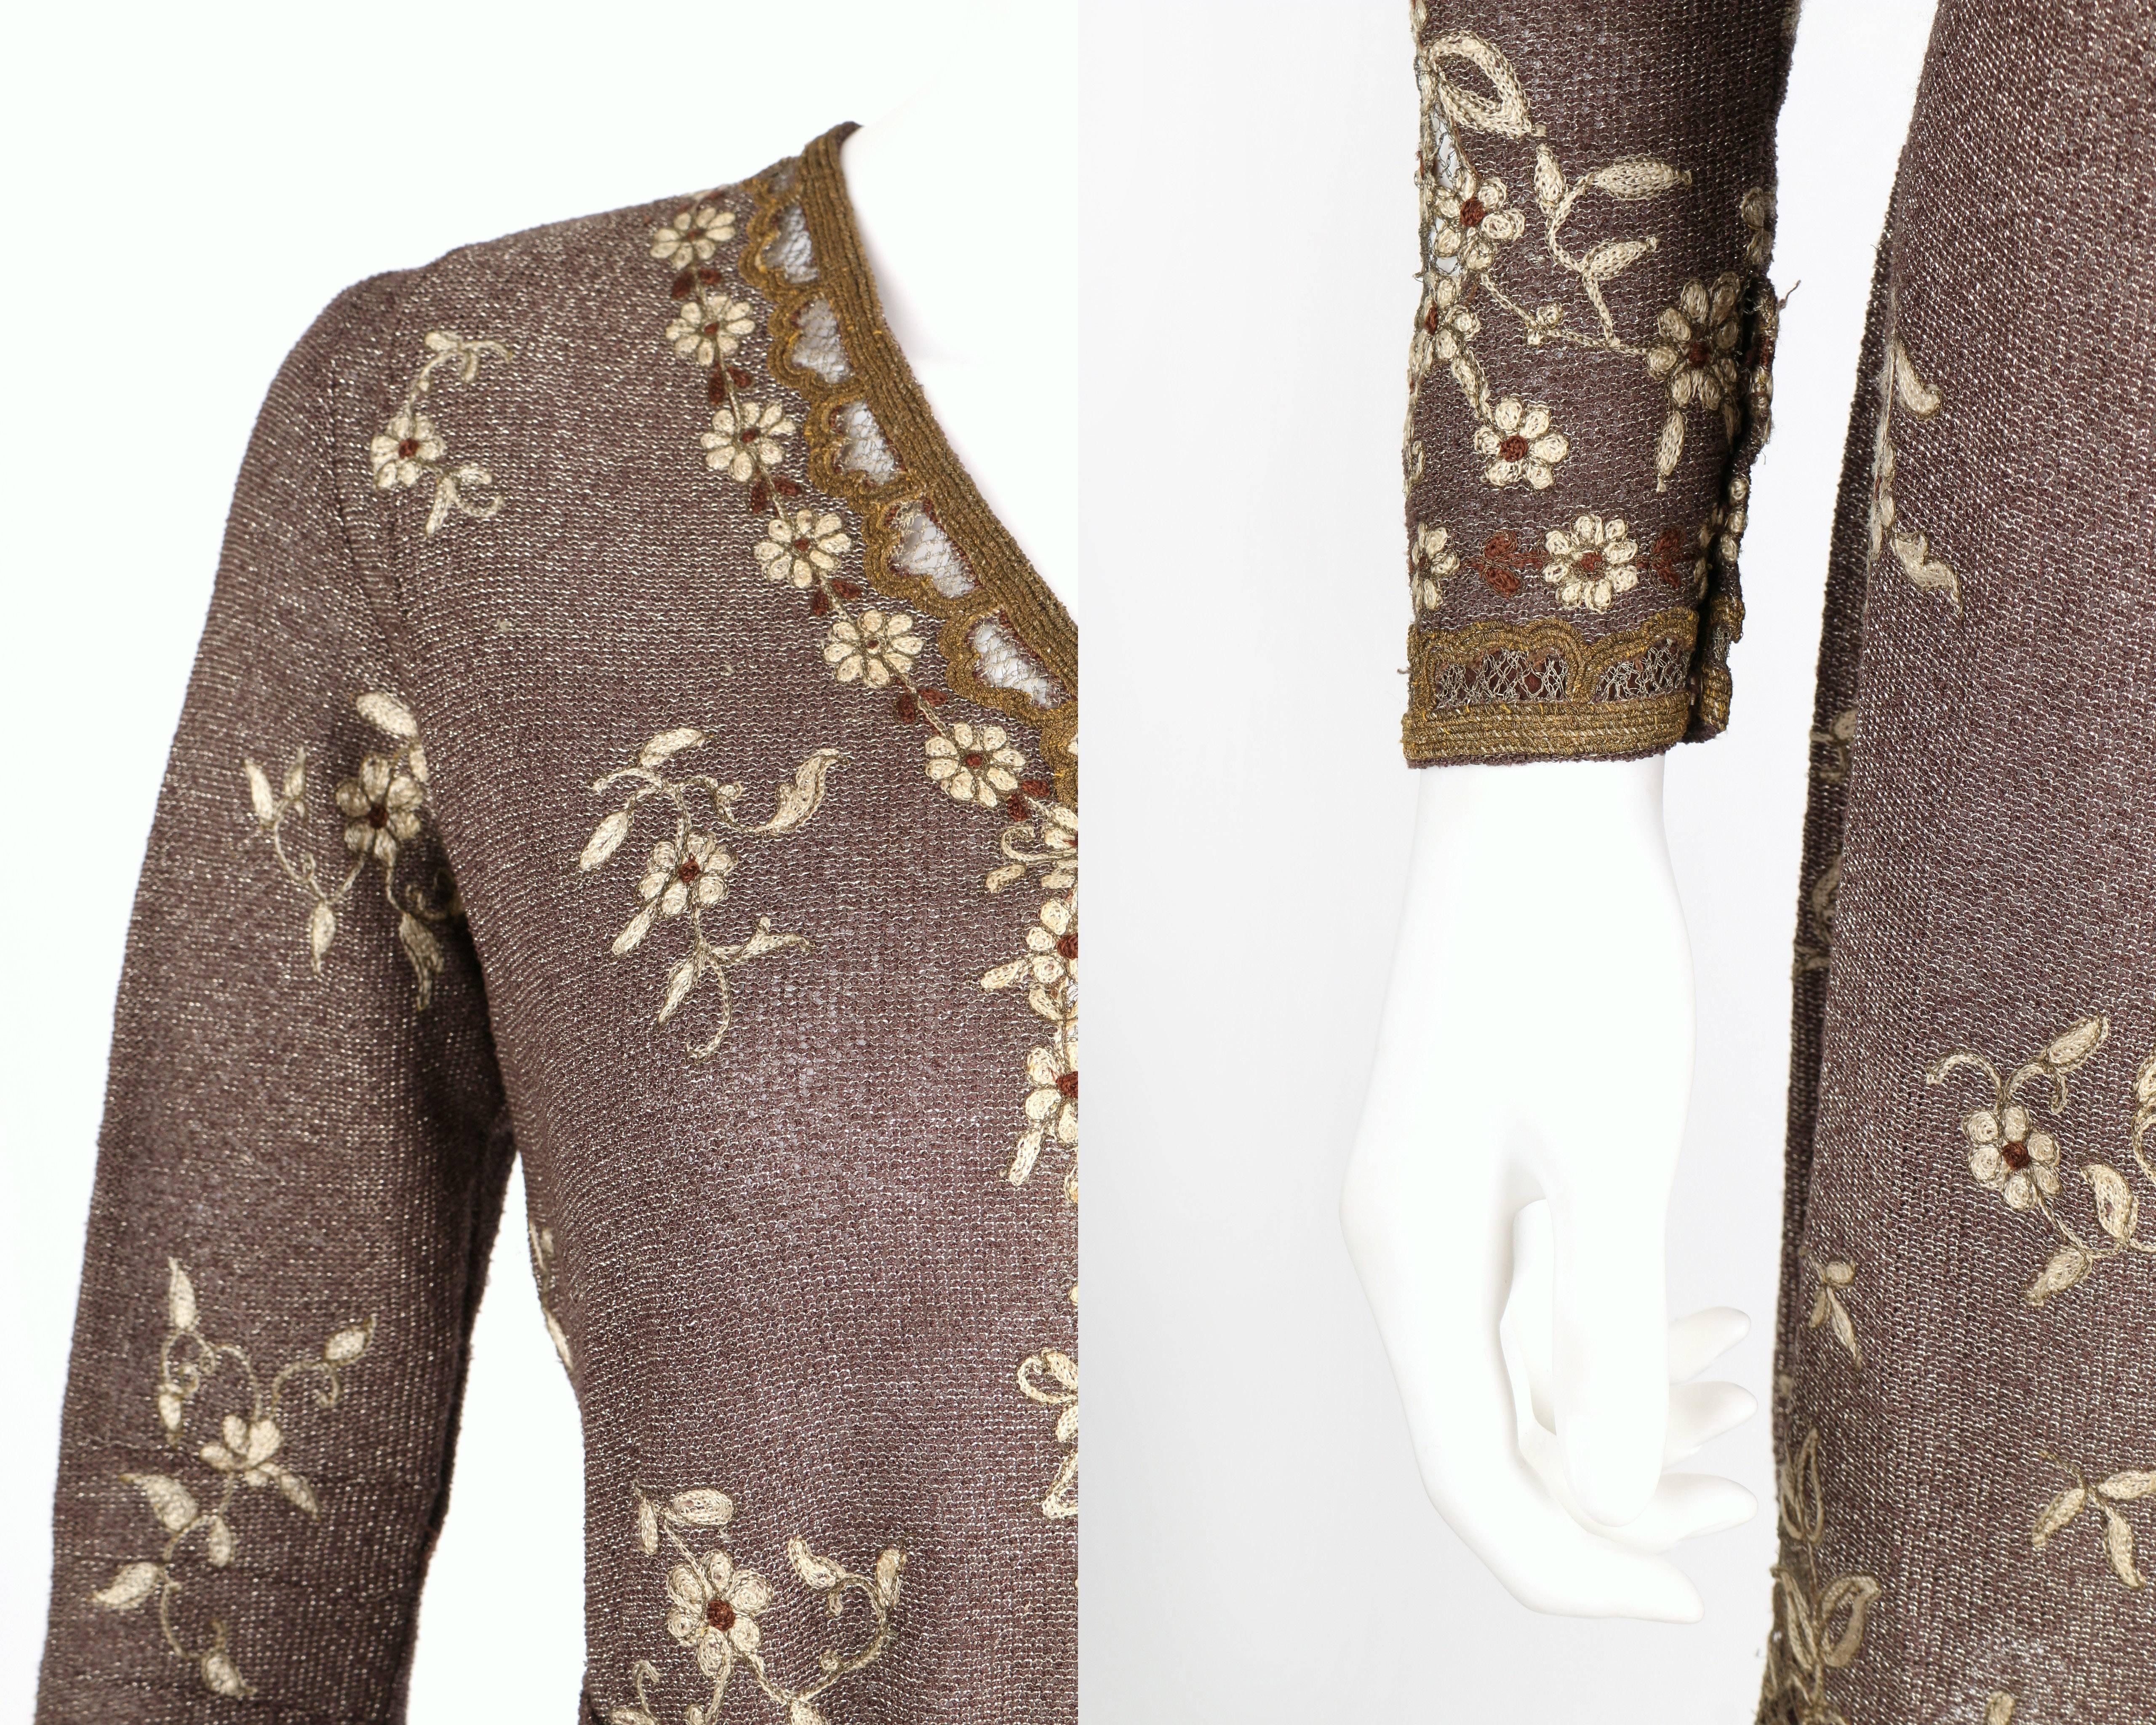 OOAK 1930's Parisian Haute Couture Brown Bronze Metallic Knit Embroidered Dress In Good Condition For Sale In Thiensville, WI